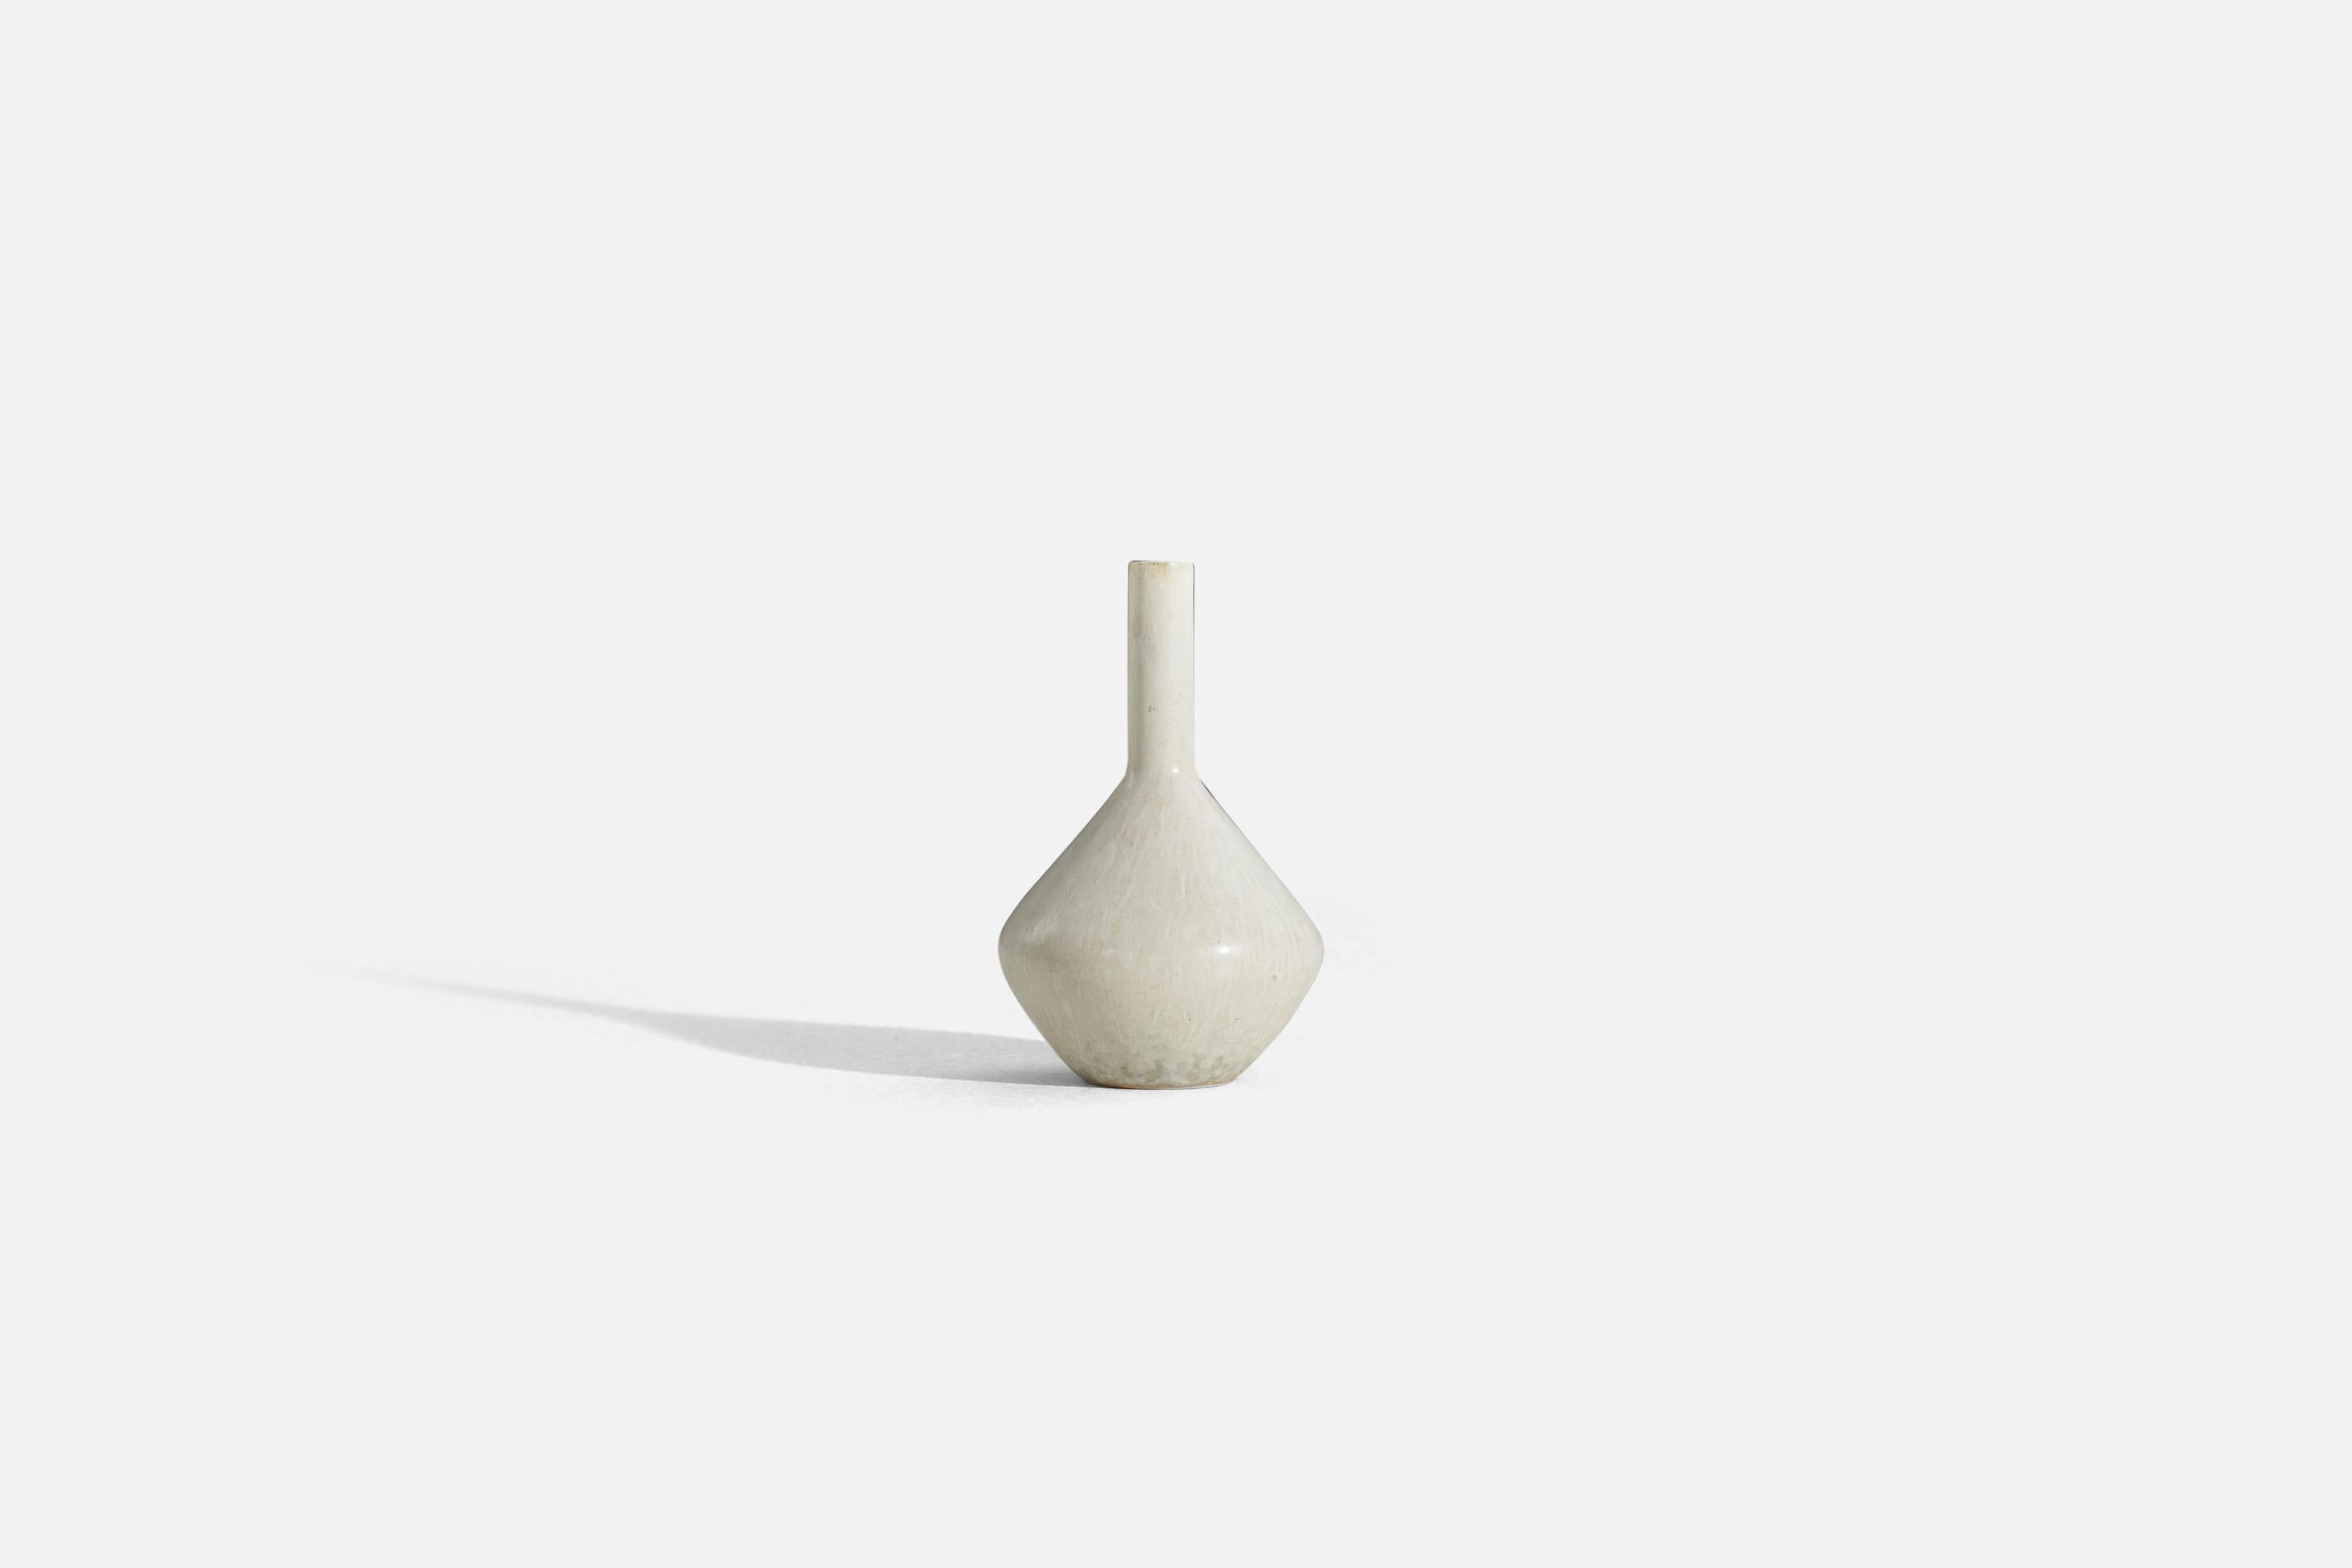 A white-glazed stoneware vase designed by Carl-Harry Stålhane and produced by Rörstrand, Sweden, 1960s.